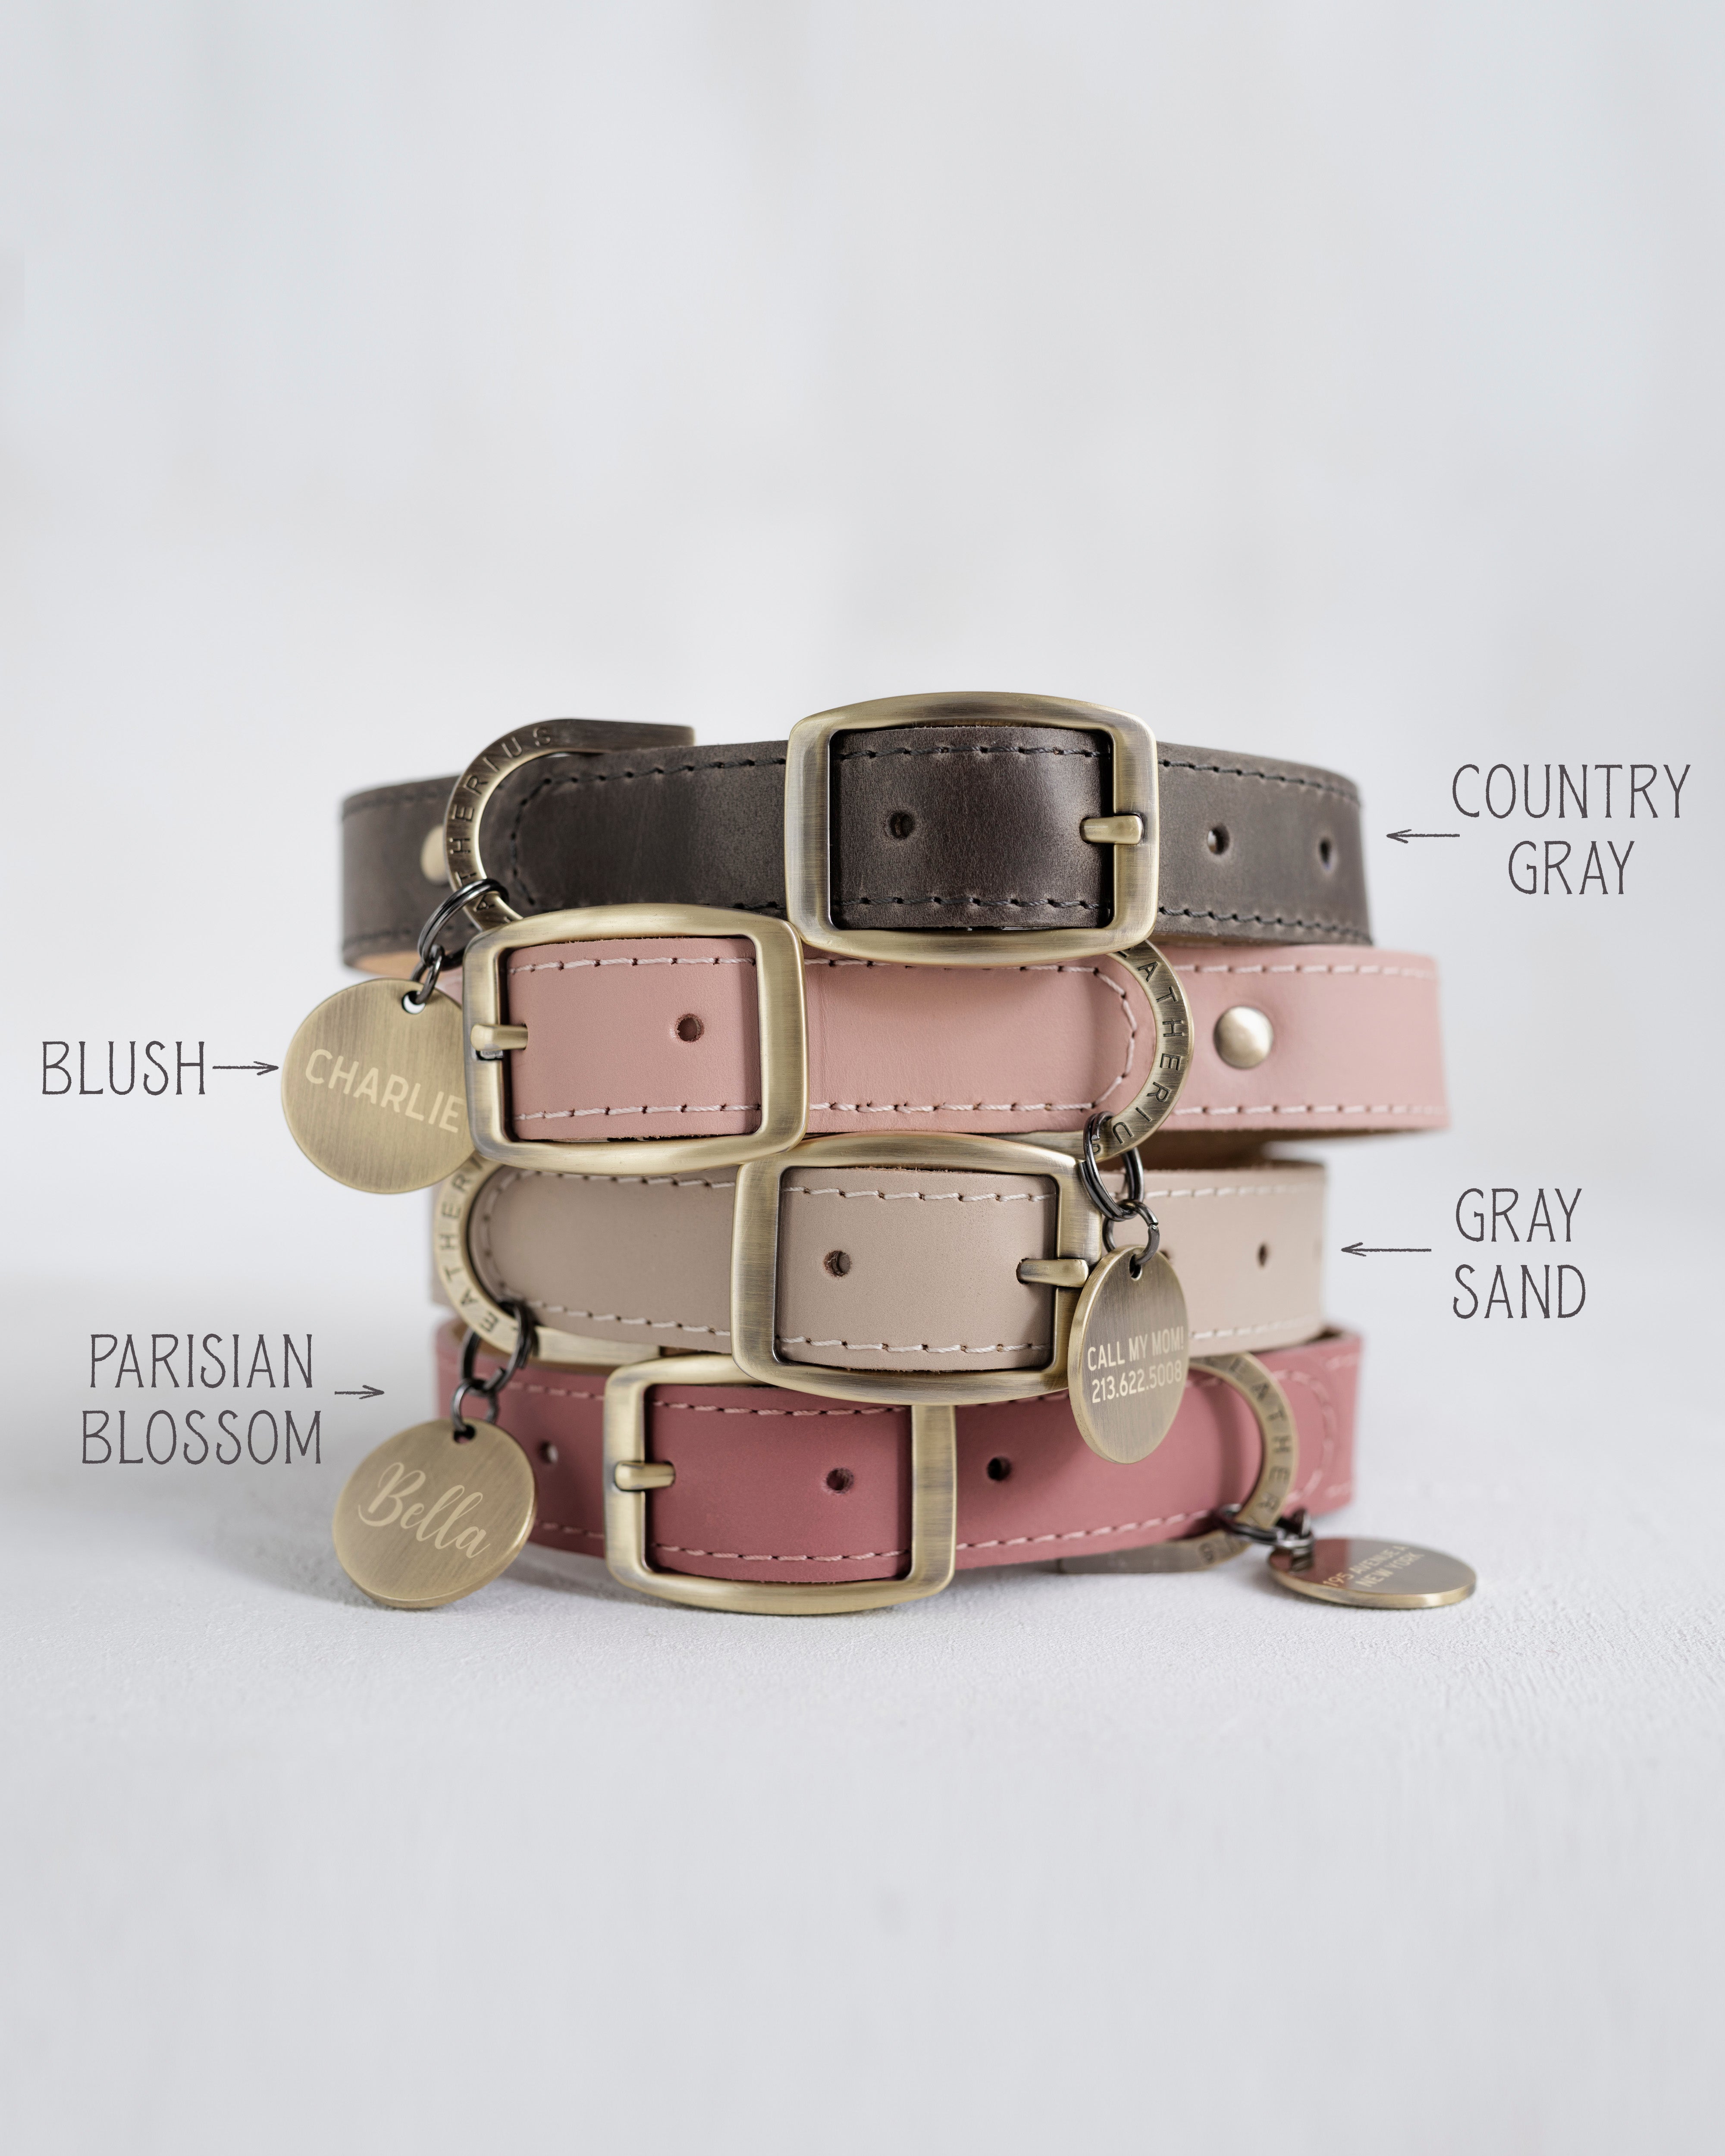 Personalized leather dog collar in soft super comfy leather